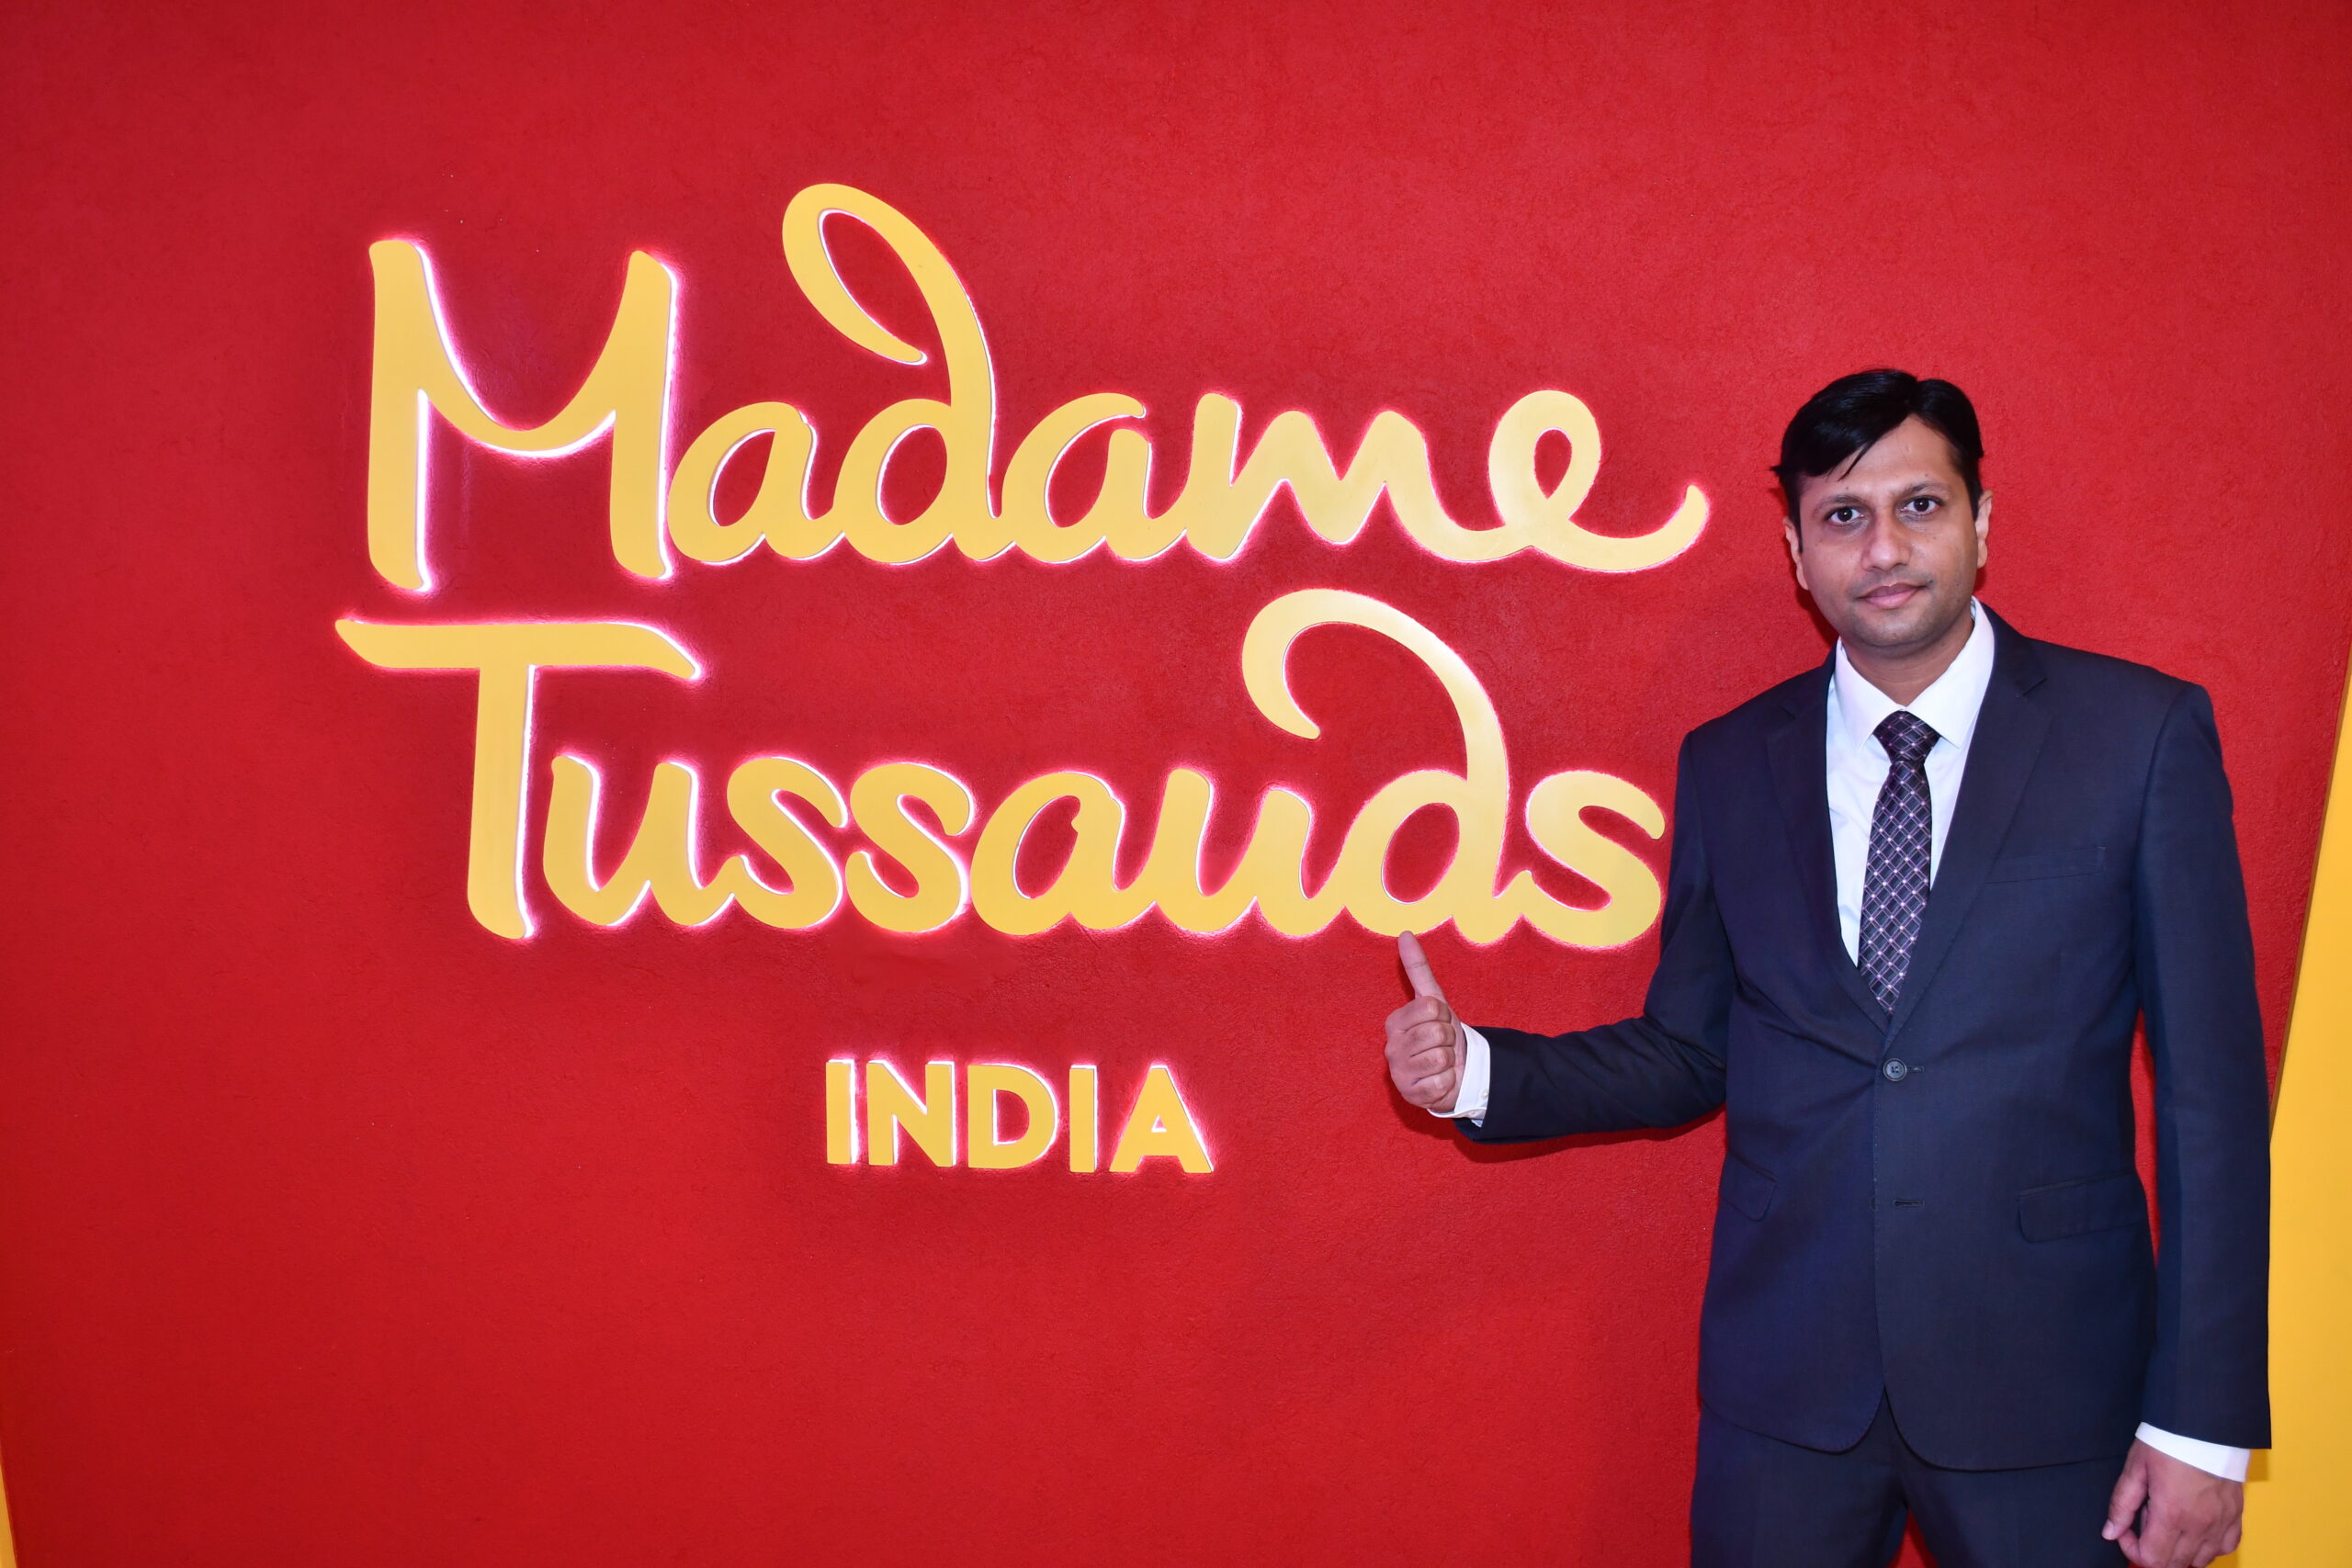 Madame Tussauds India announces reopening, relocates to DLF Mall of India – NOIDA